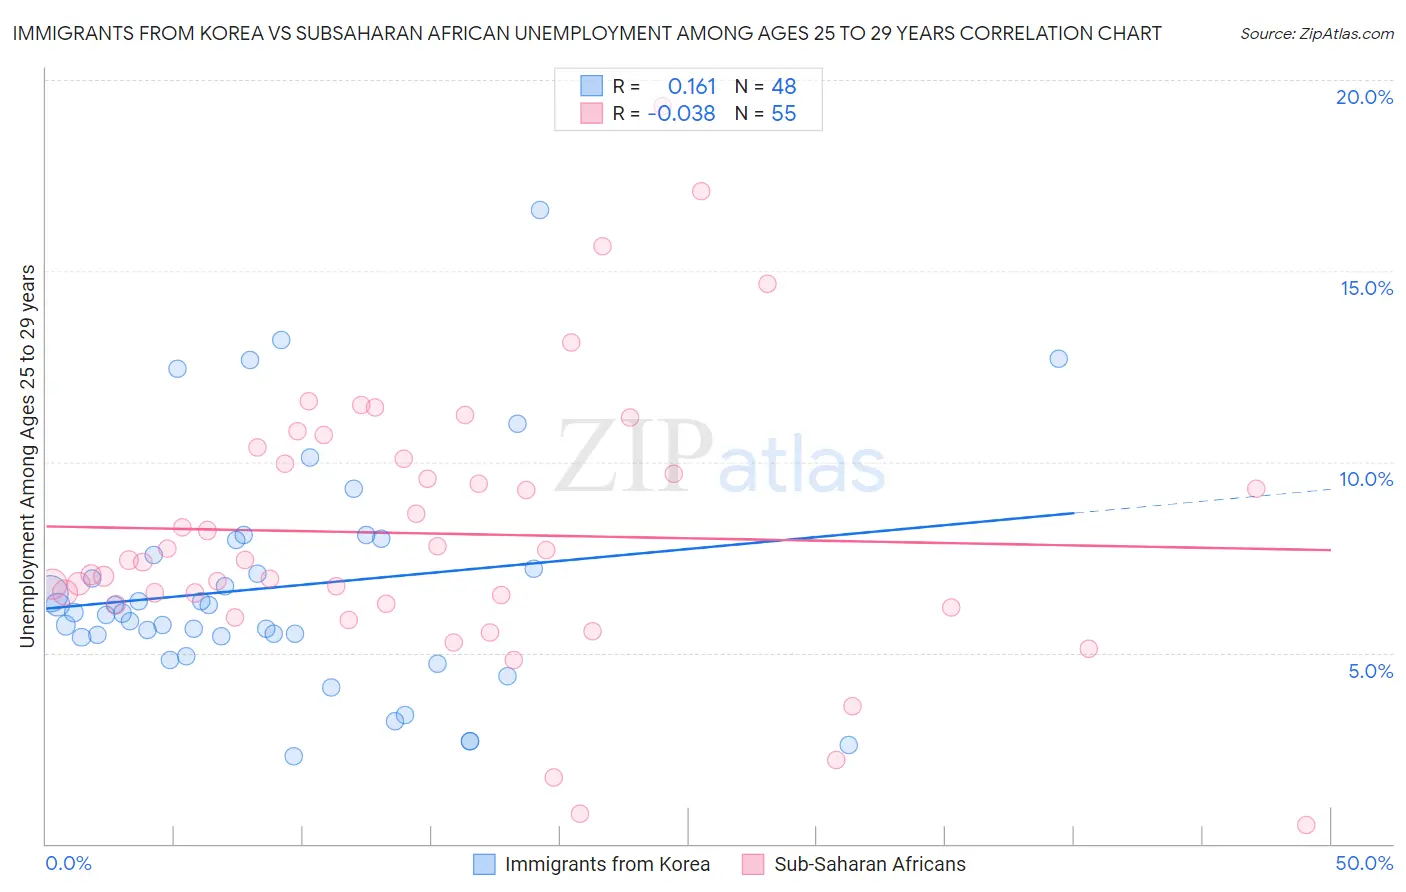 Immigrants from Korea vs Subsaharan African Unemployment Among Ages 25 to 29 years